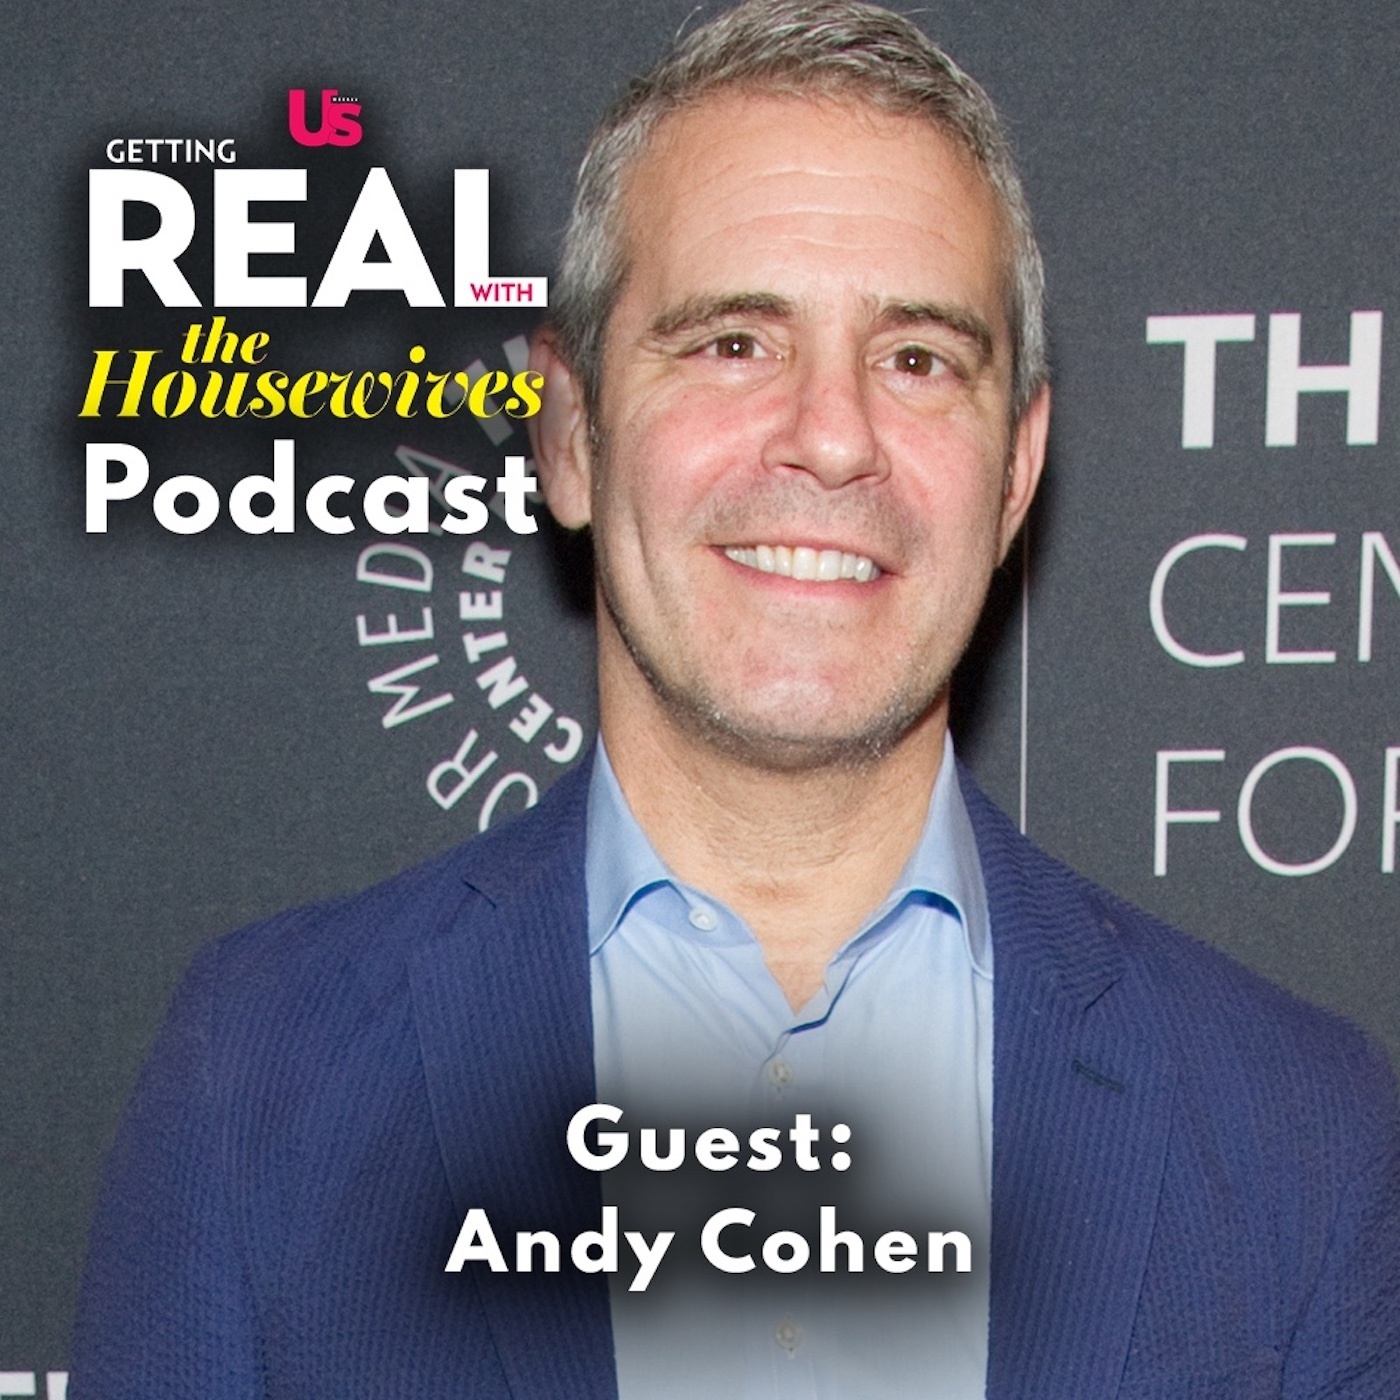 Andy Cohen Doesn't Think Jen Shah Will Be Back for 'RHOSLC' Season 3, RHONY Legacy Cast Is 'Close' to Locked In